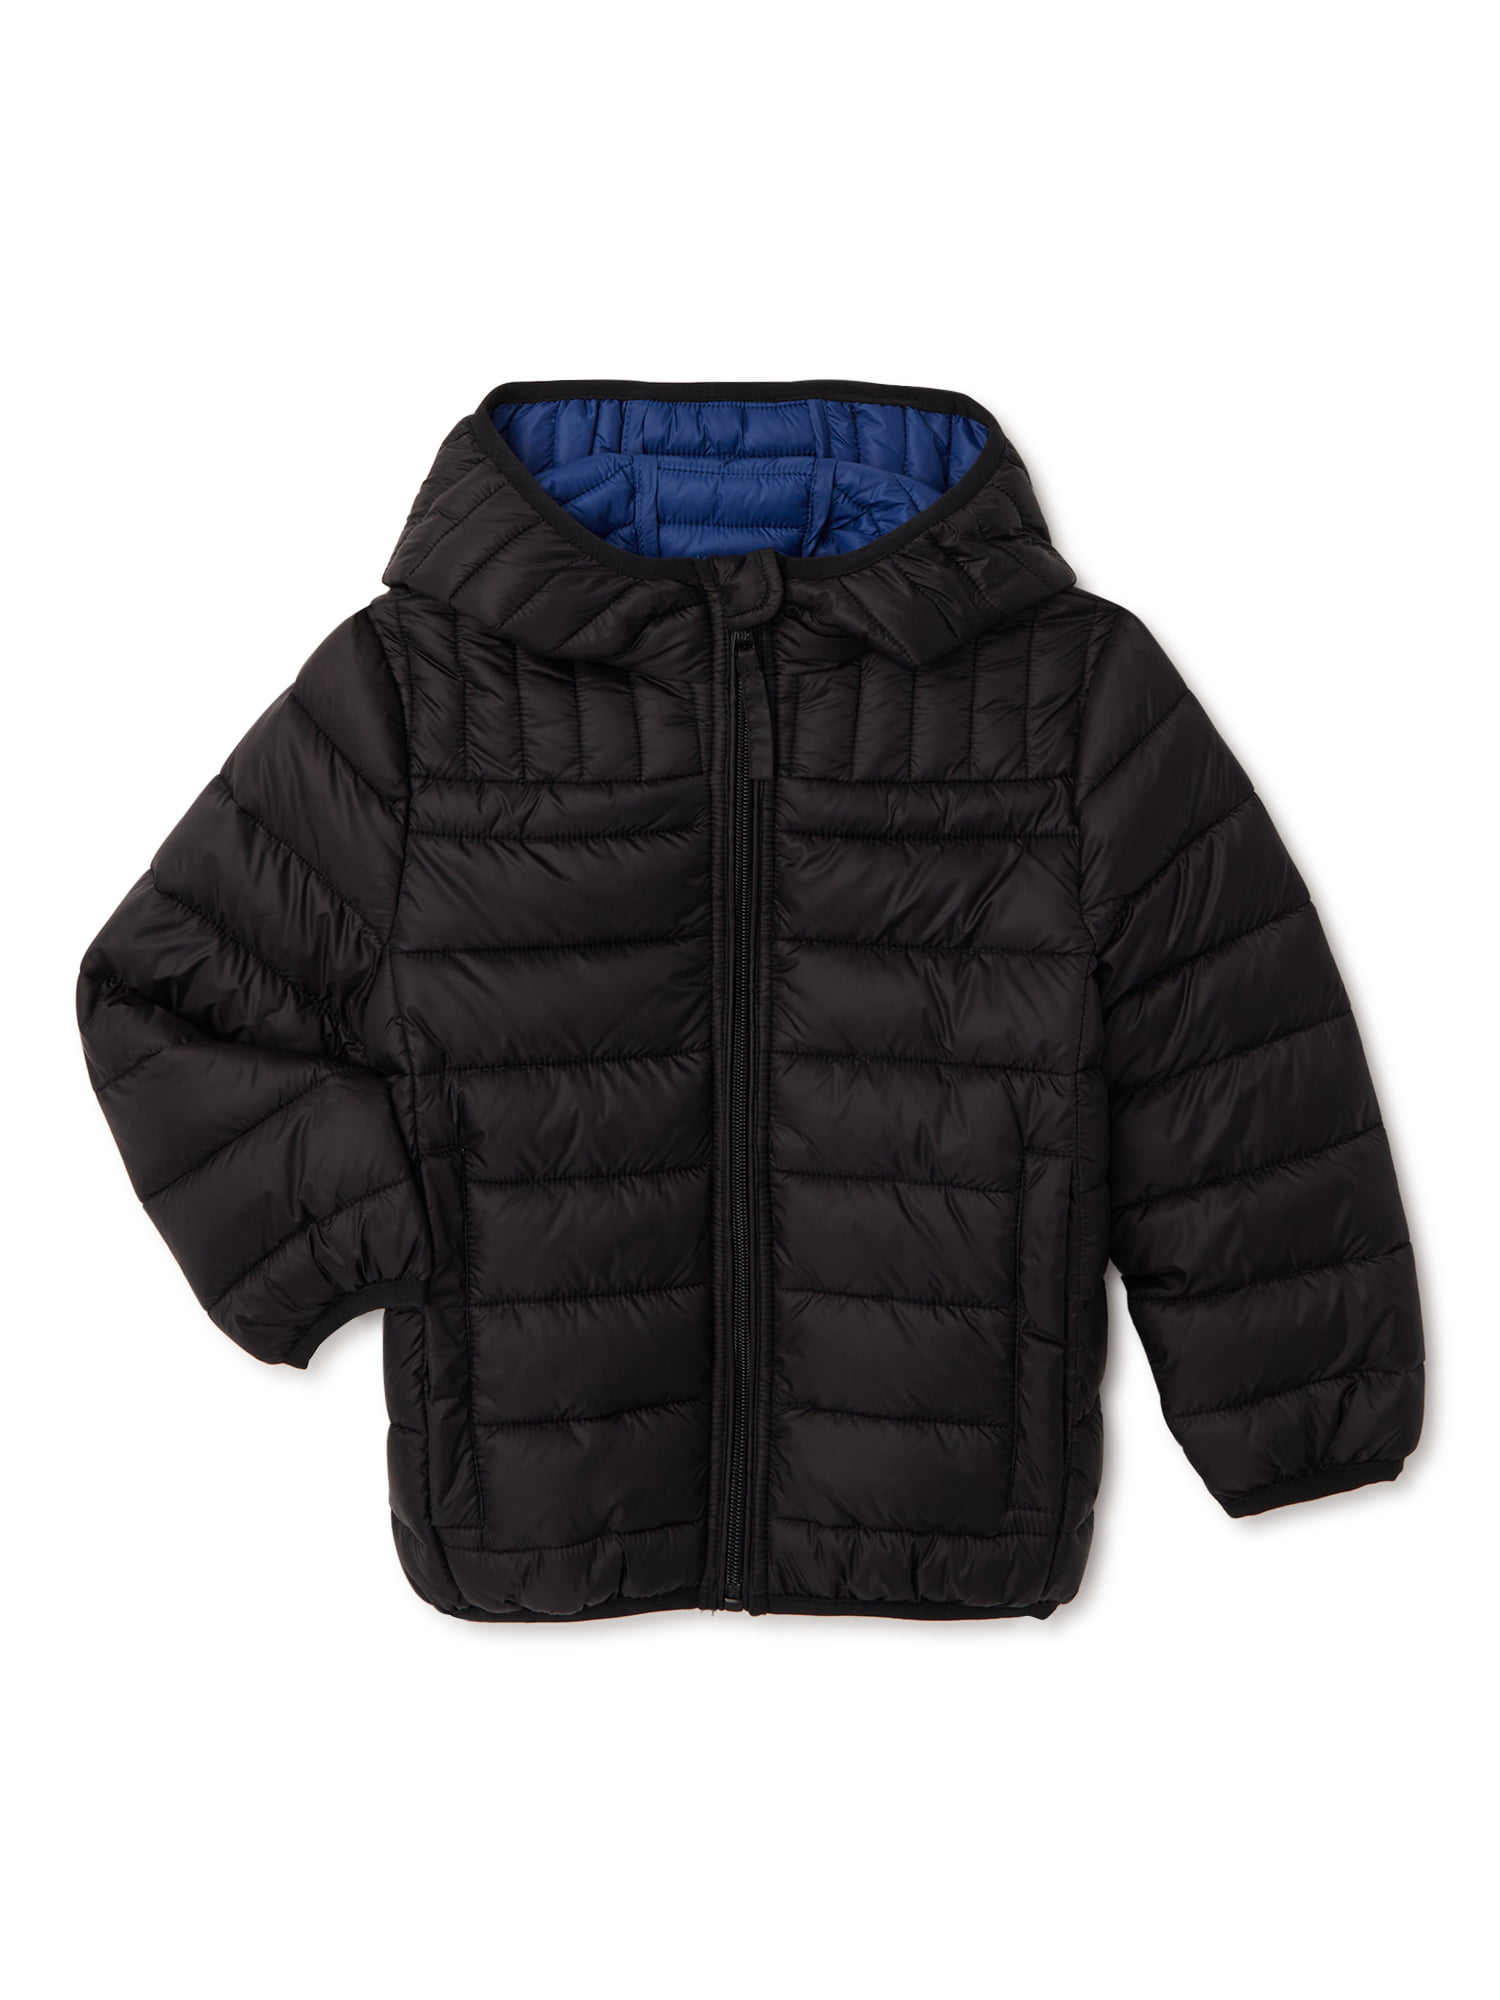 URBAN REPUBLIC Boys' Jacket Packable Lightweight Quilted Bubble Puffer Jacket 